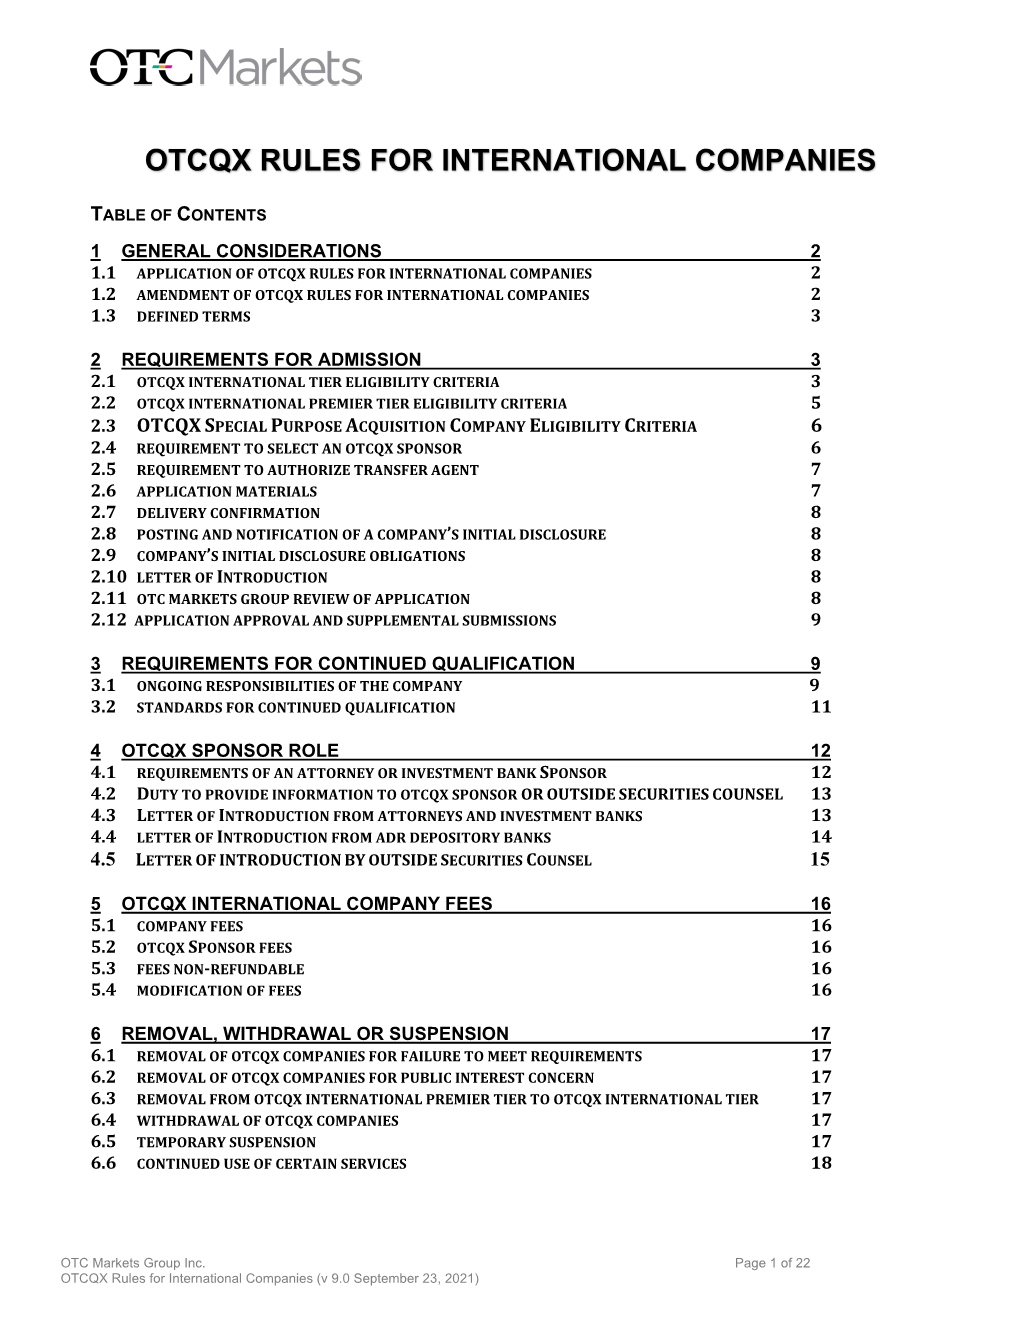 Otcqx Rules for International Companies